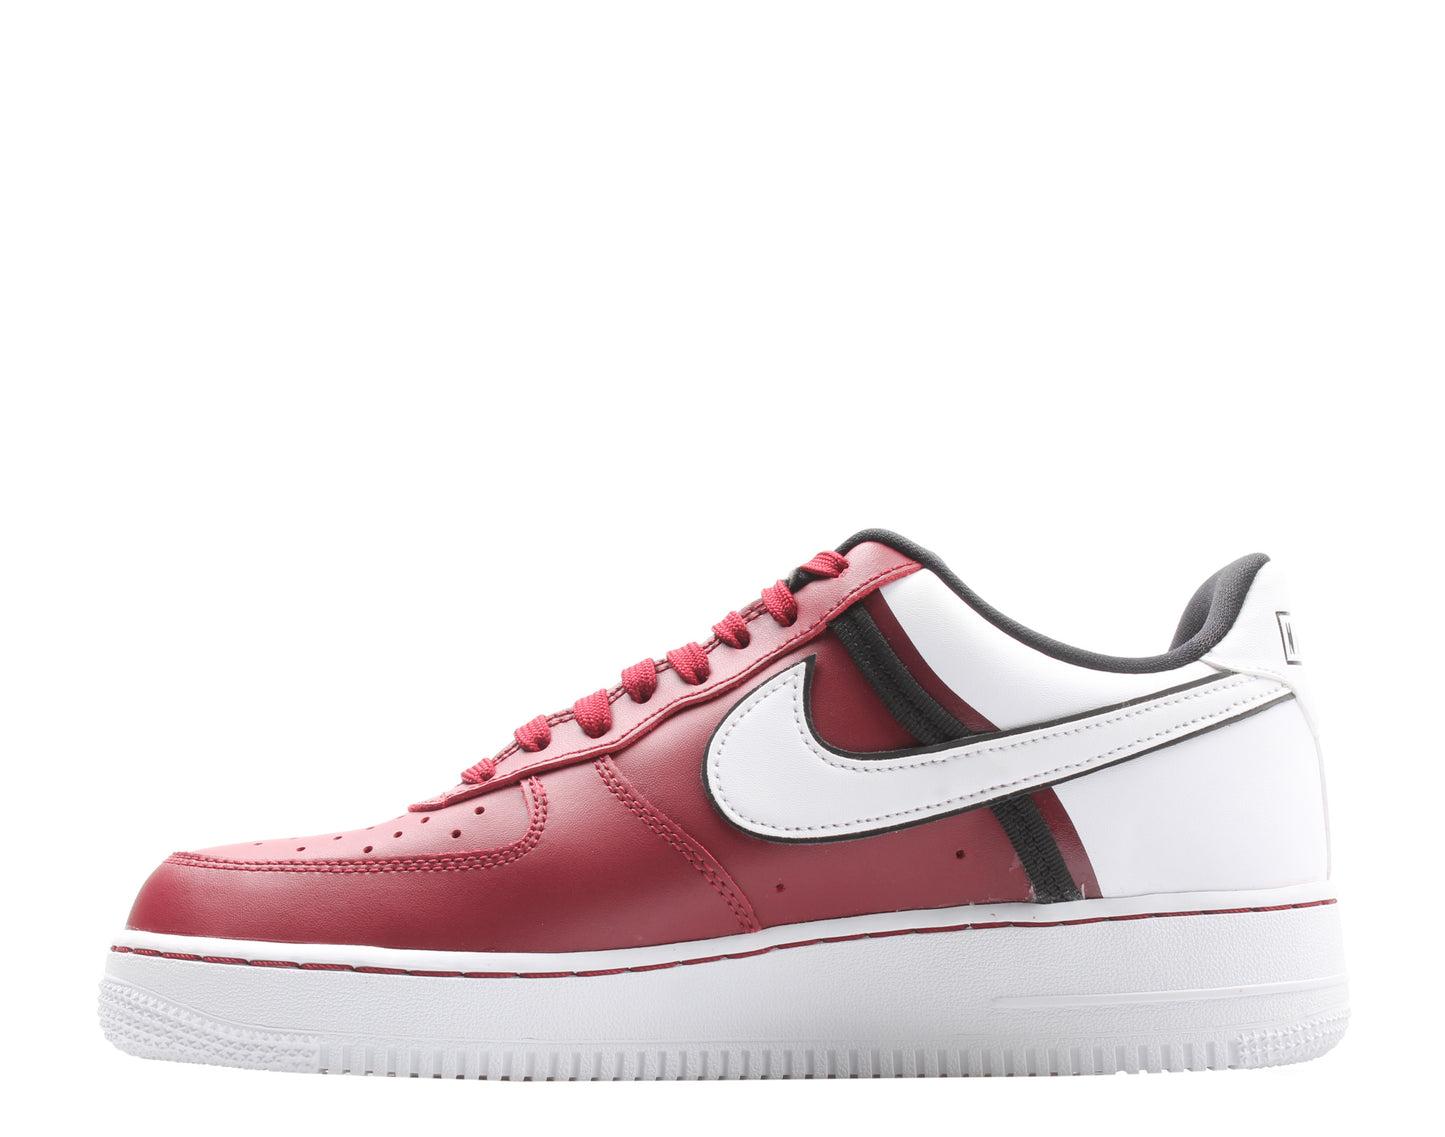 Nike Air Force 1 '07 LV8 2 Team Red/White Men's Basketball Shoes CI0061-600